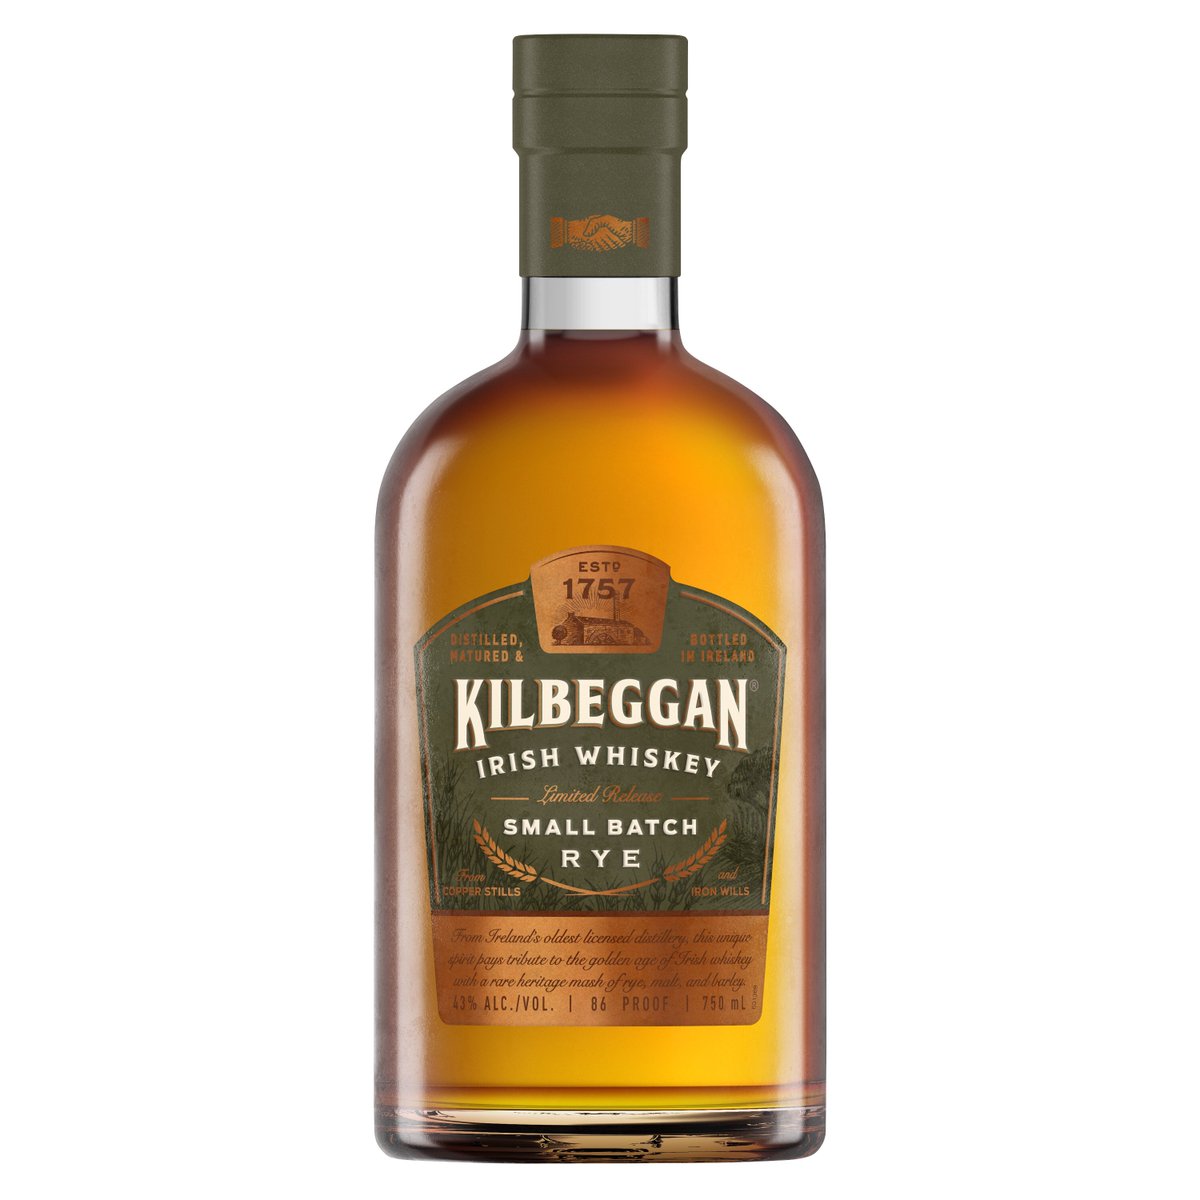 Happy #StPaddysDay! Celebrate with our list of #Irishwhiskeys that #bourbon lovers need to try - including this @Kilbeggan Rye! Link below 🍀🥃 gobourbon.com/best-irish-whi…